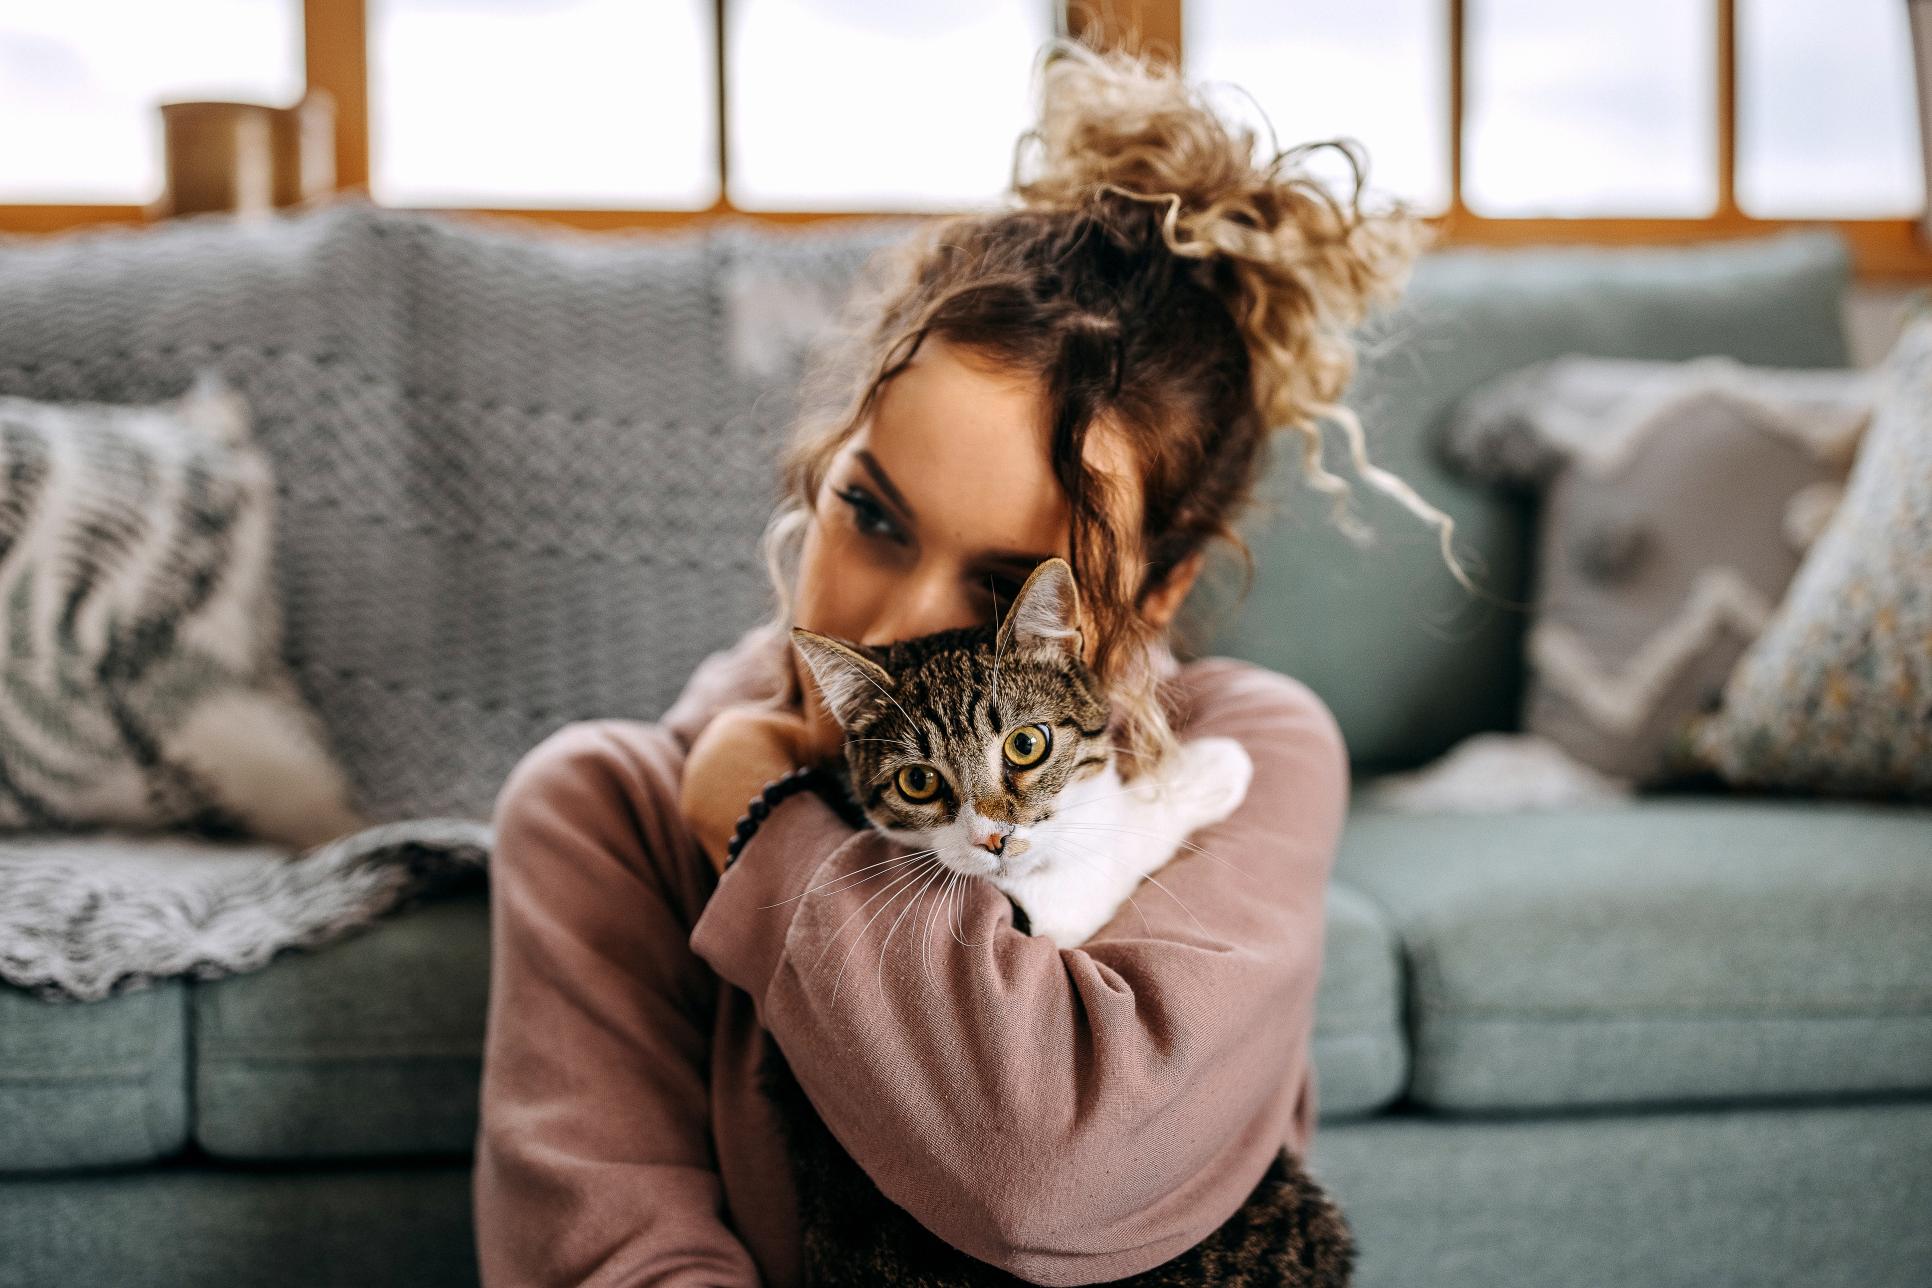 Young woman bonding with her cat.